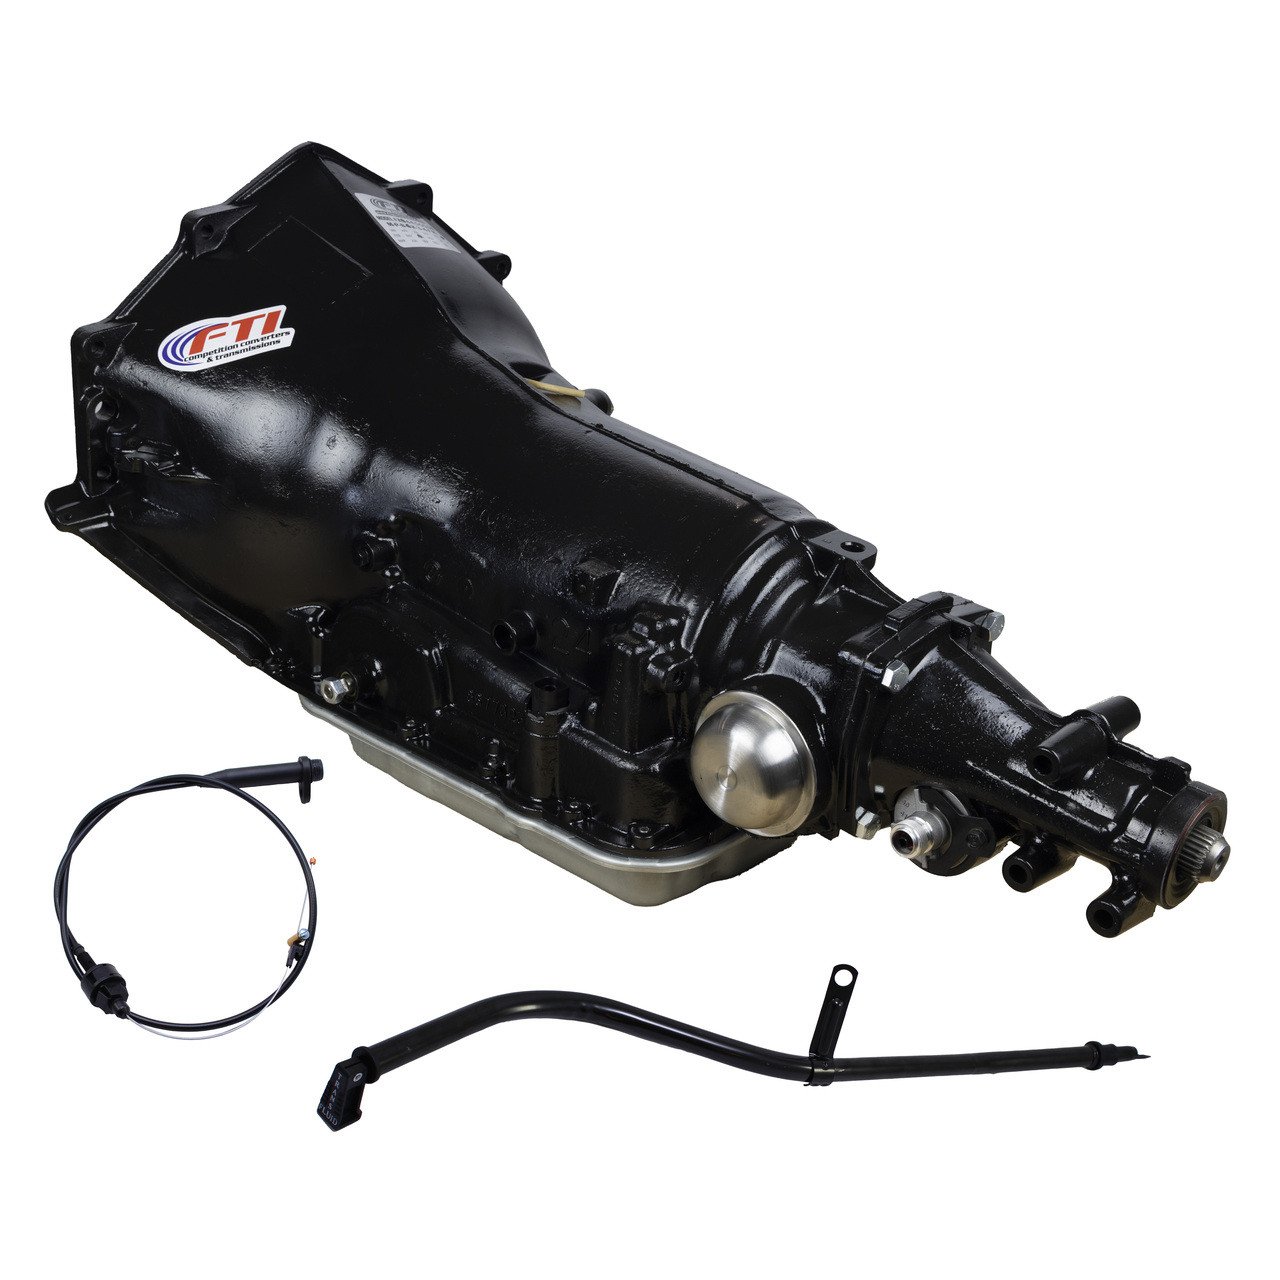 FT7R4-2H 700R4 Level 2 Automatic Transmission For Engines